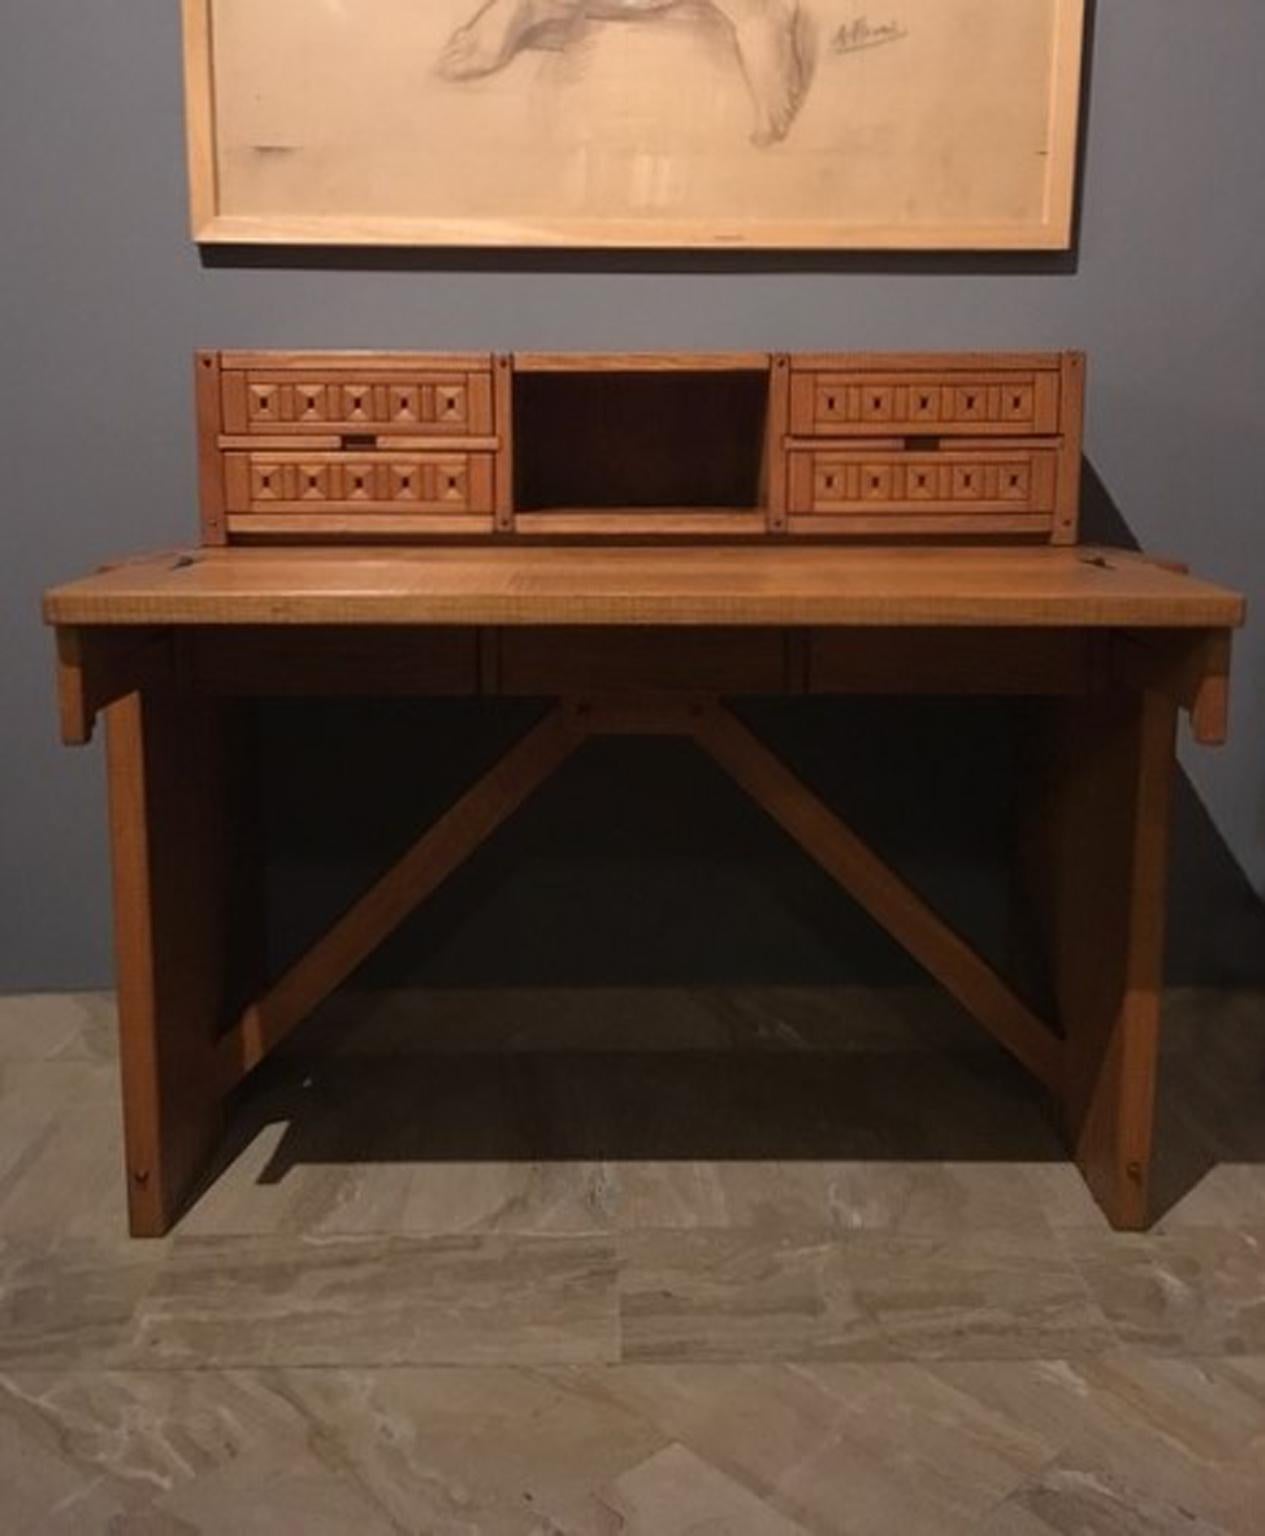 Officina Rivadossi workshop realized in the 1990s this beautiful desk with the typical handwork that characterized all their production and that raised their pieces of furniture to pieces of art. Copy of he original drawing is visible in the